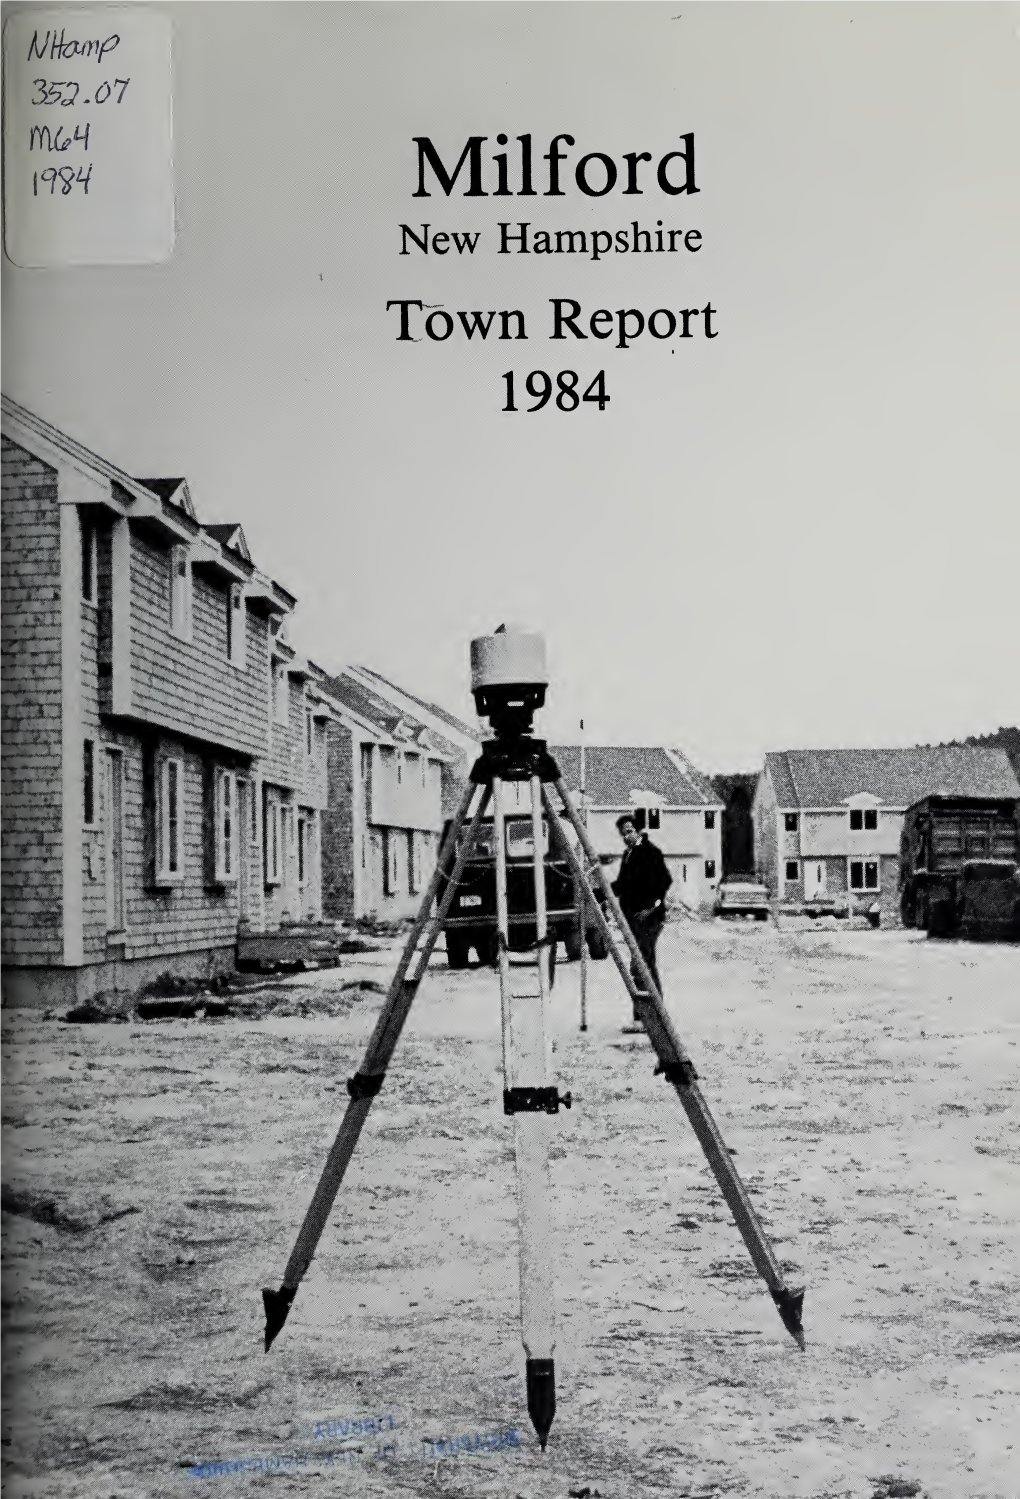 Annual Report of the Town of Milford, New Hampshire